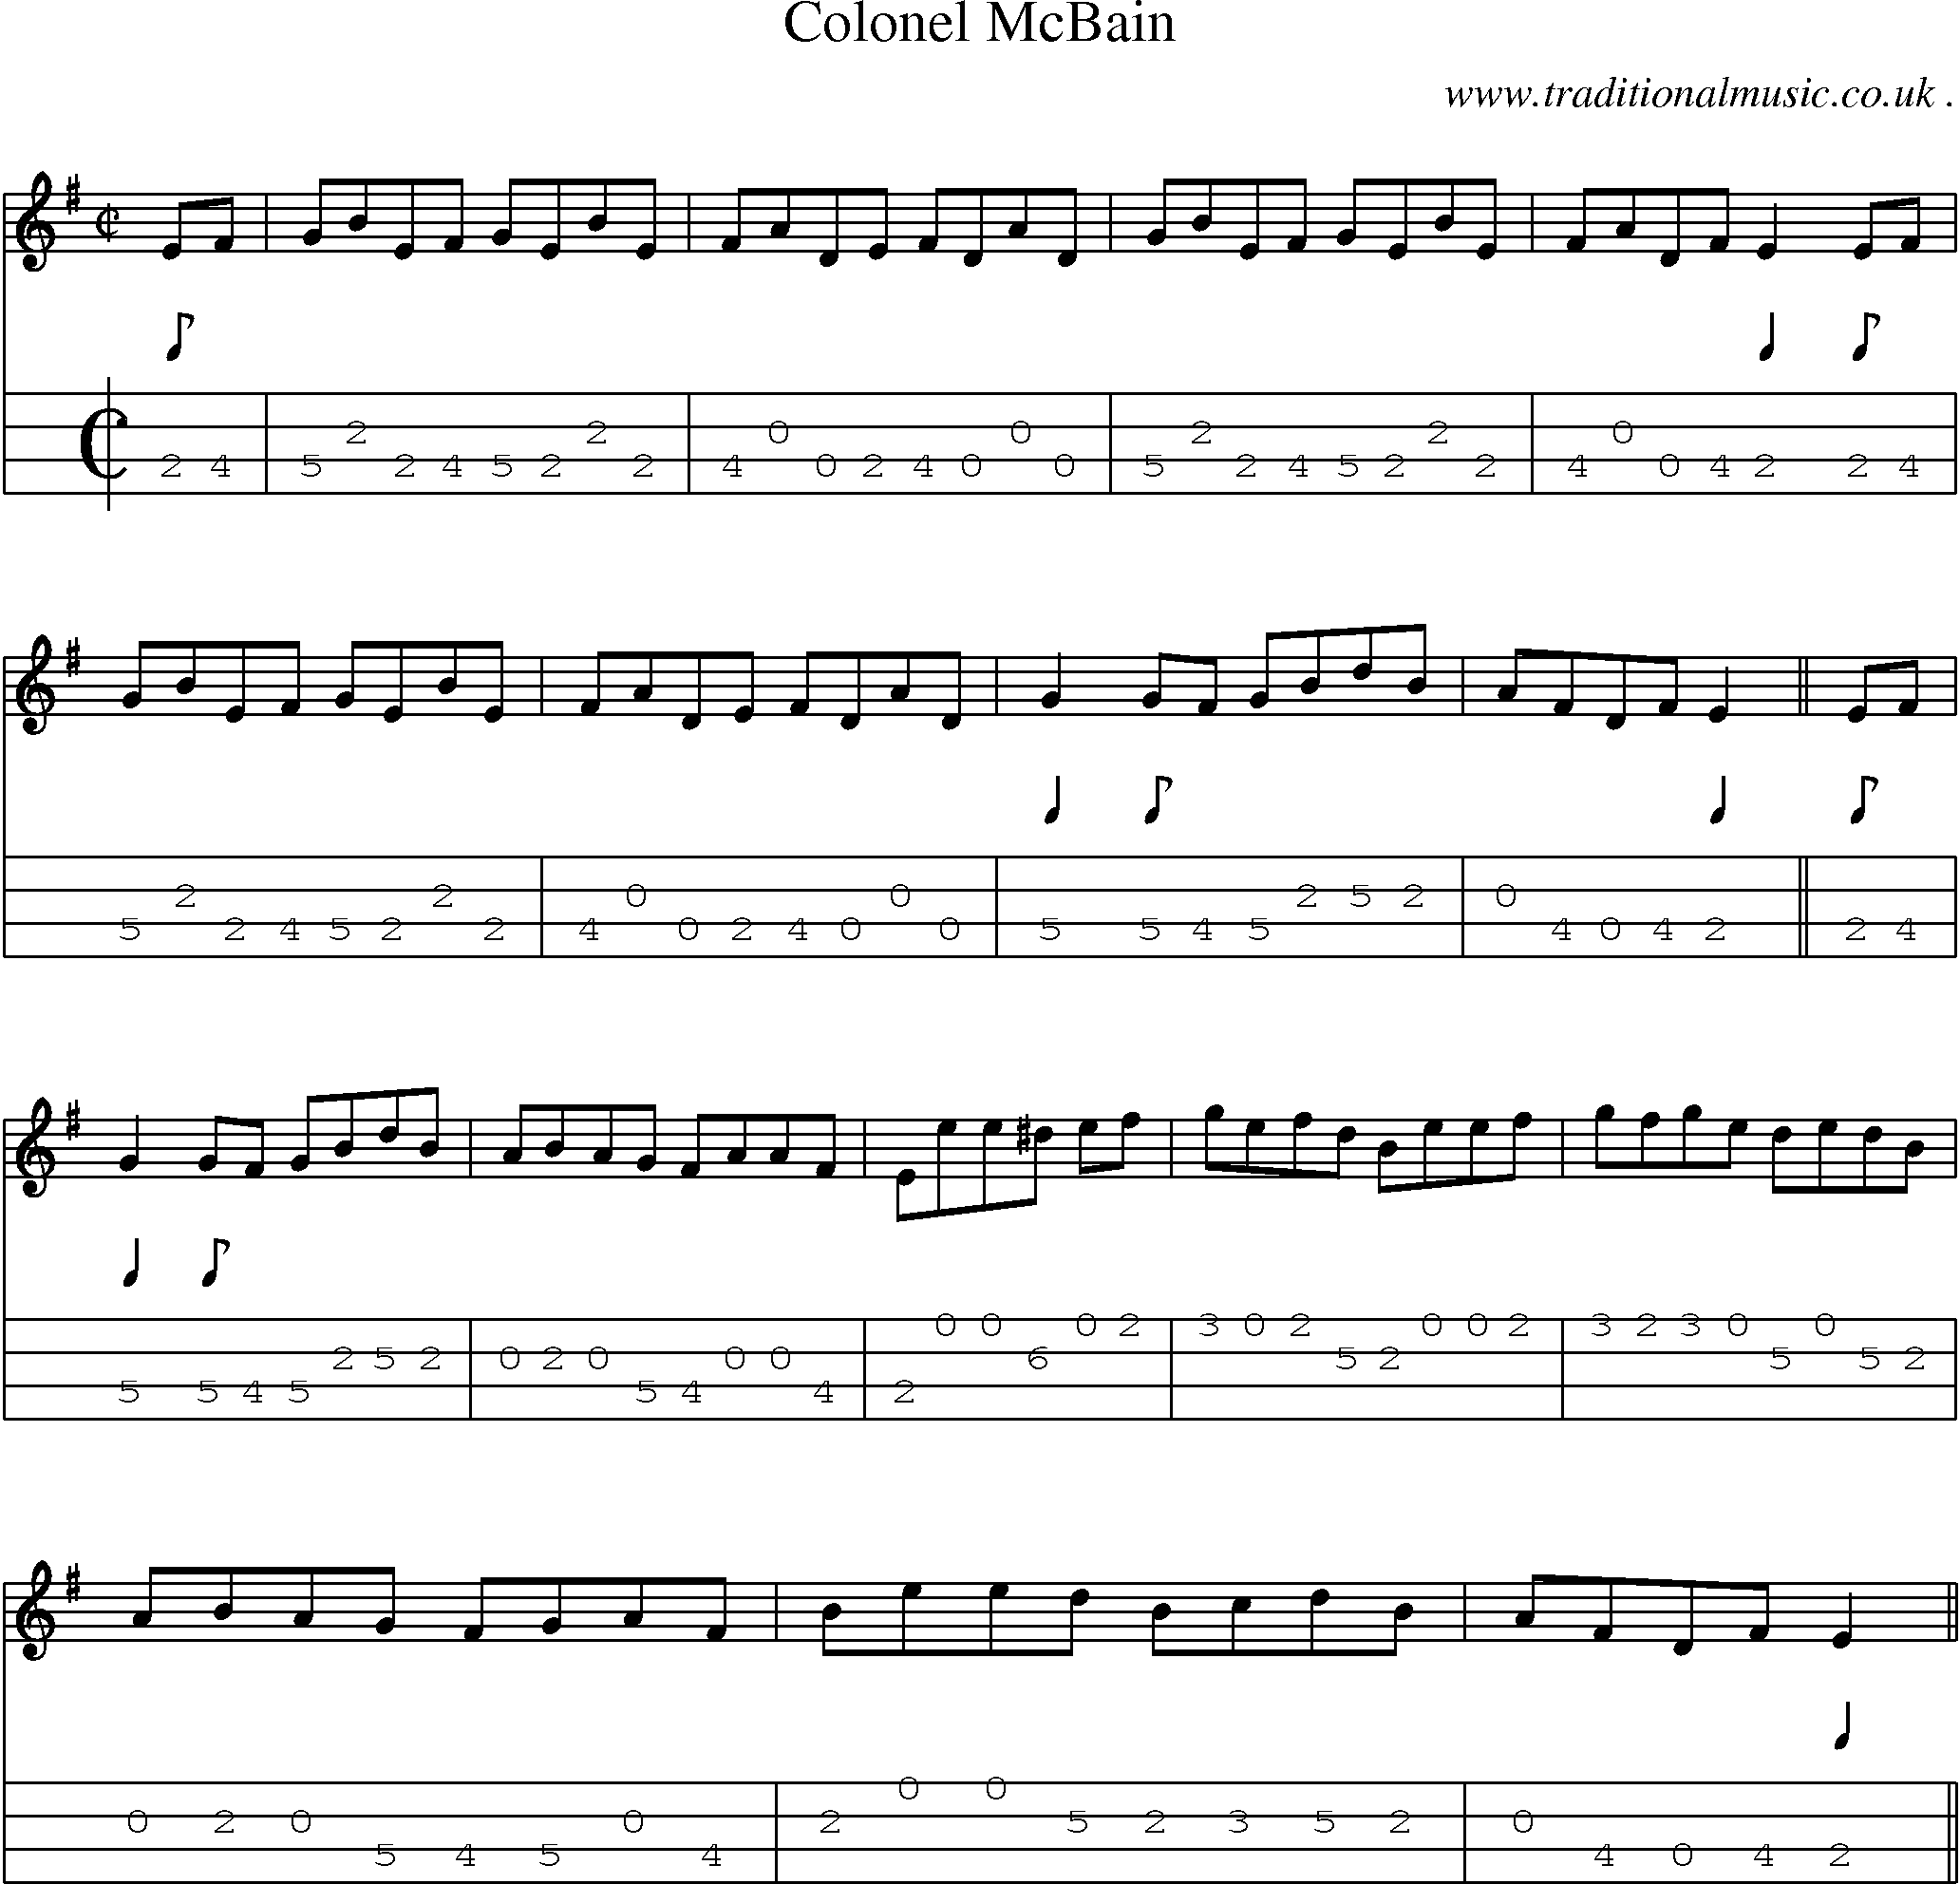 Sheet-music  score, Chords and Mandolin Tabs for Colonel Mcbain